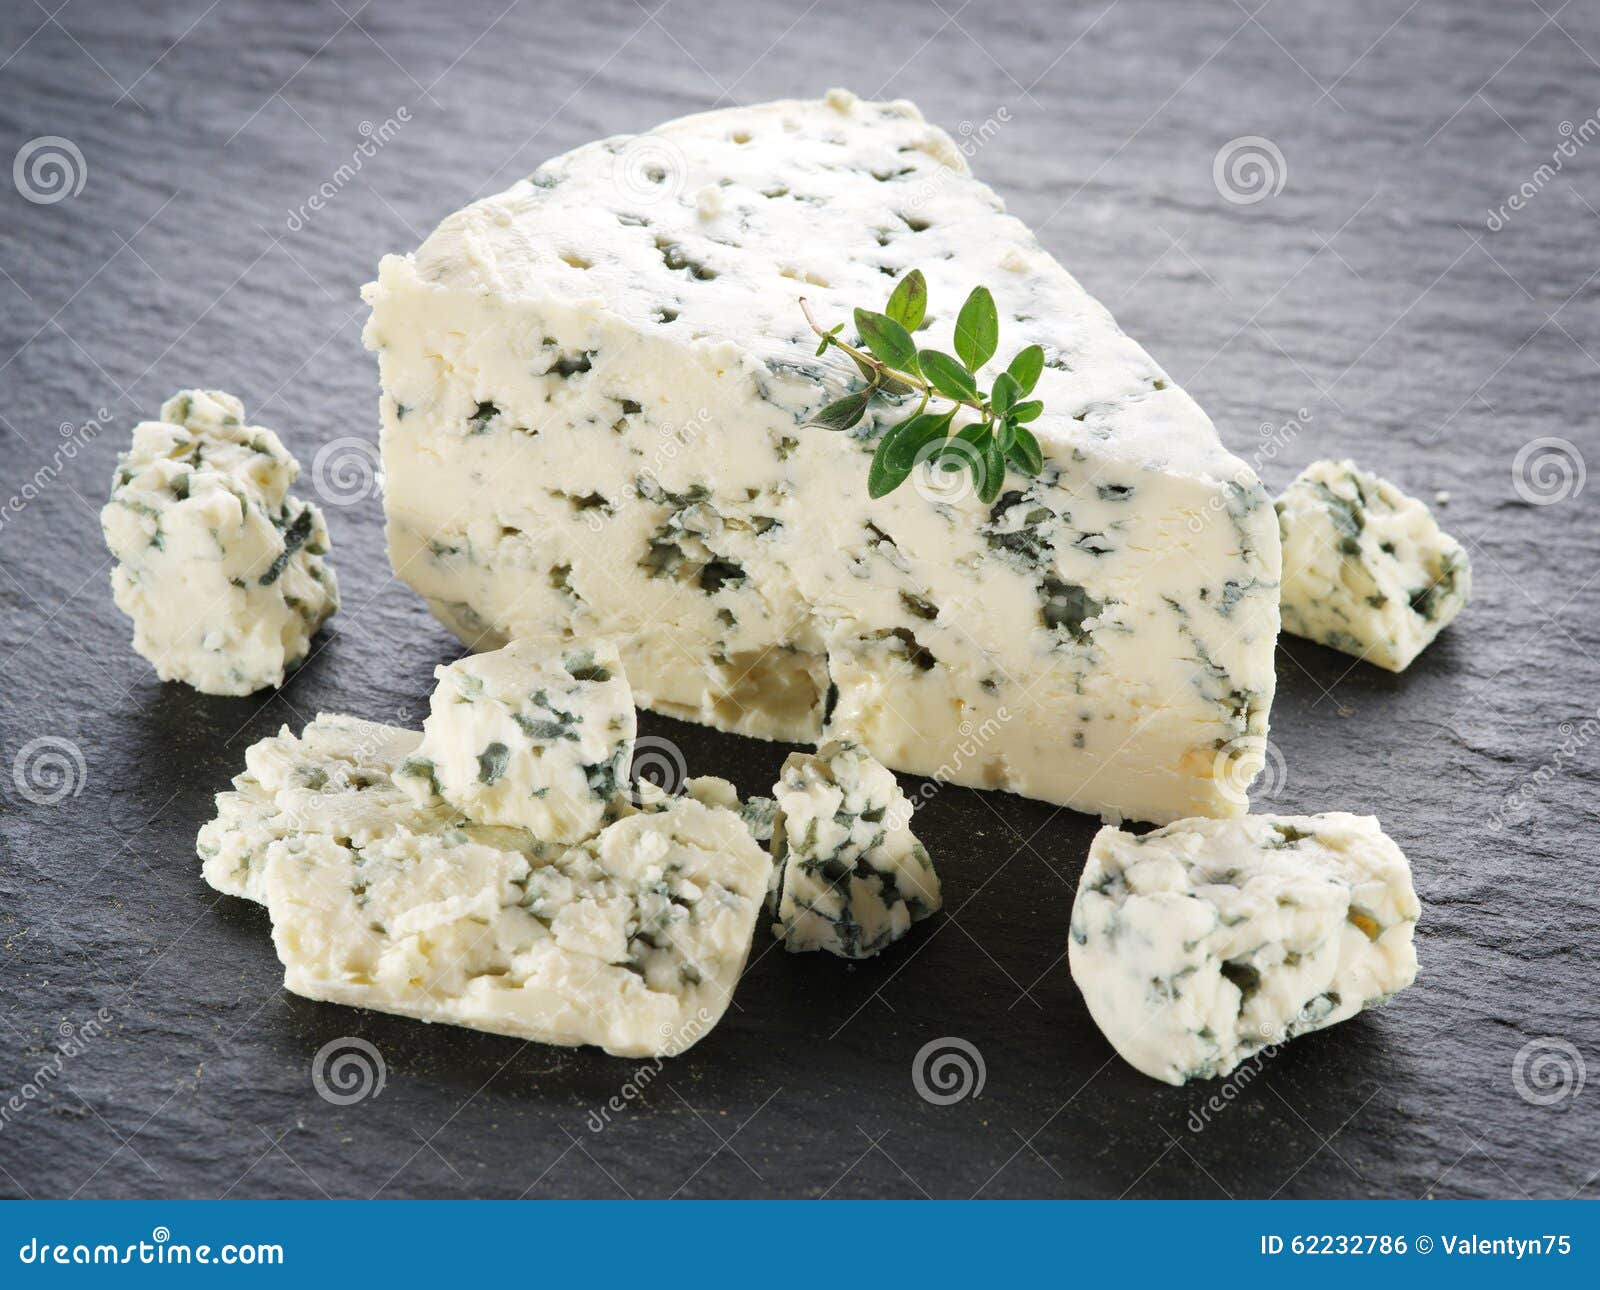 slices of danish blue cheese.